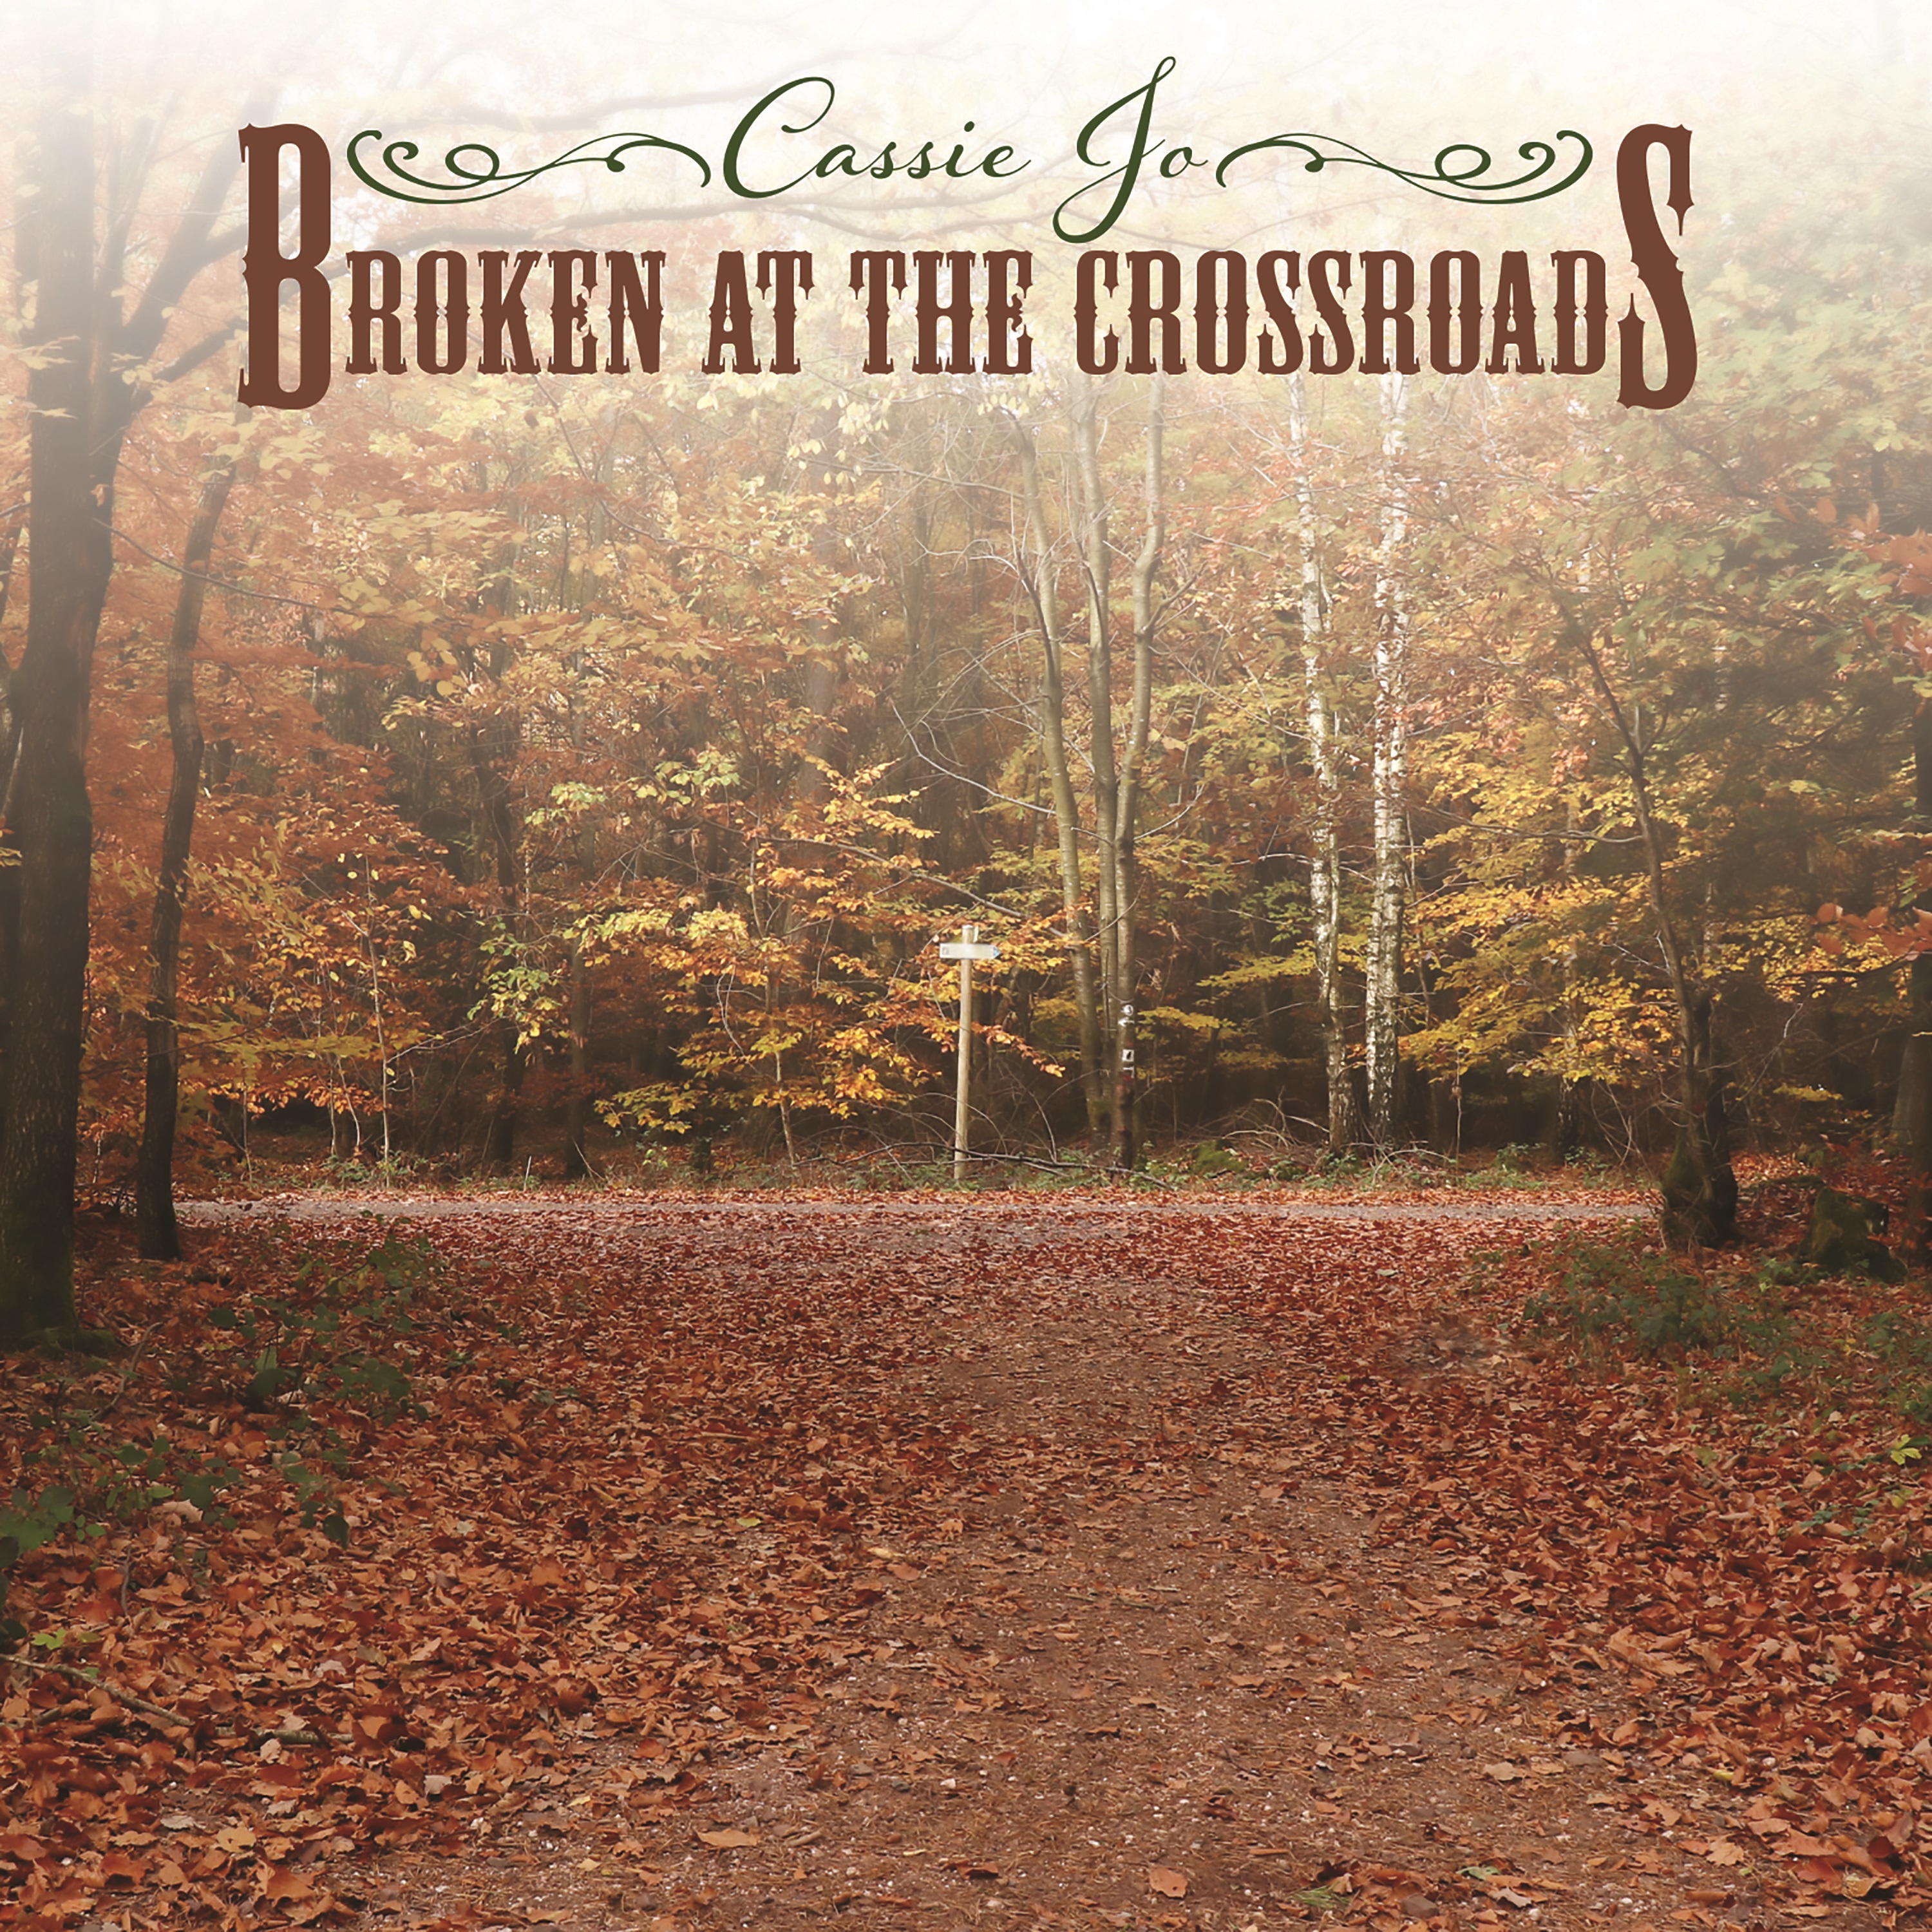 Cassie Jo Calls Back to Classic Country with “Broken at the Crossroads”